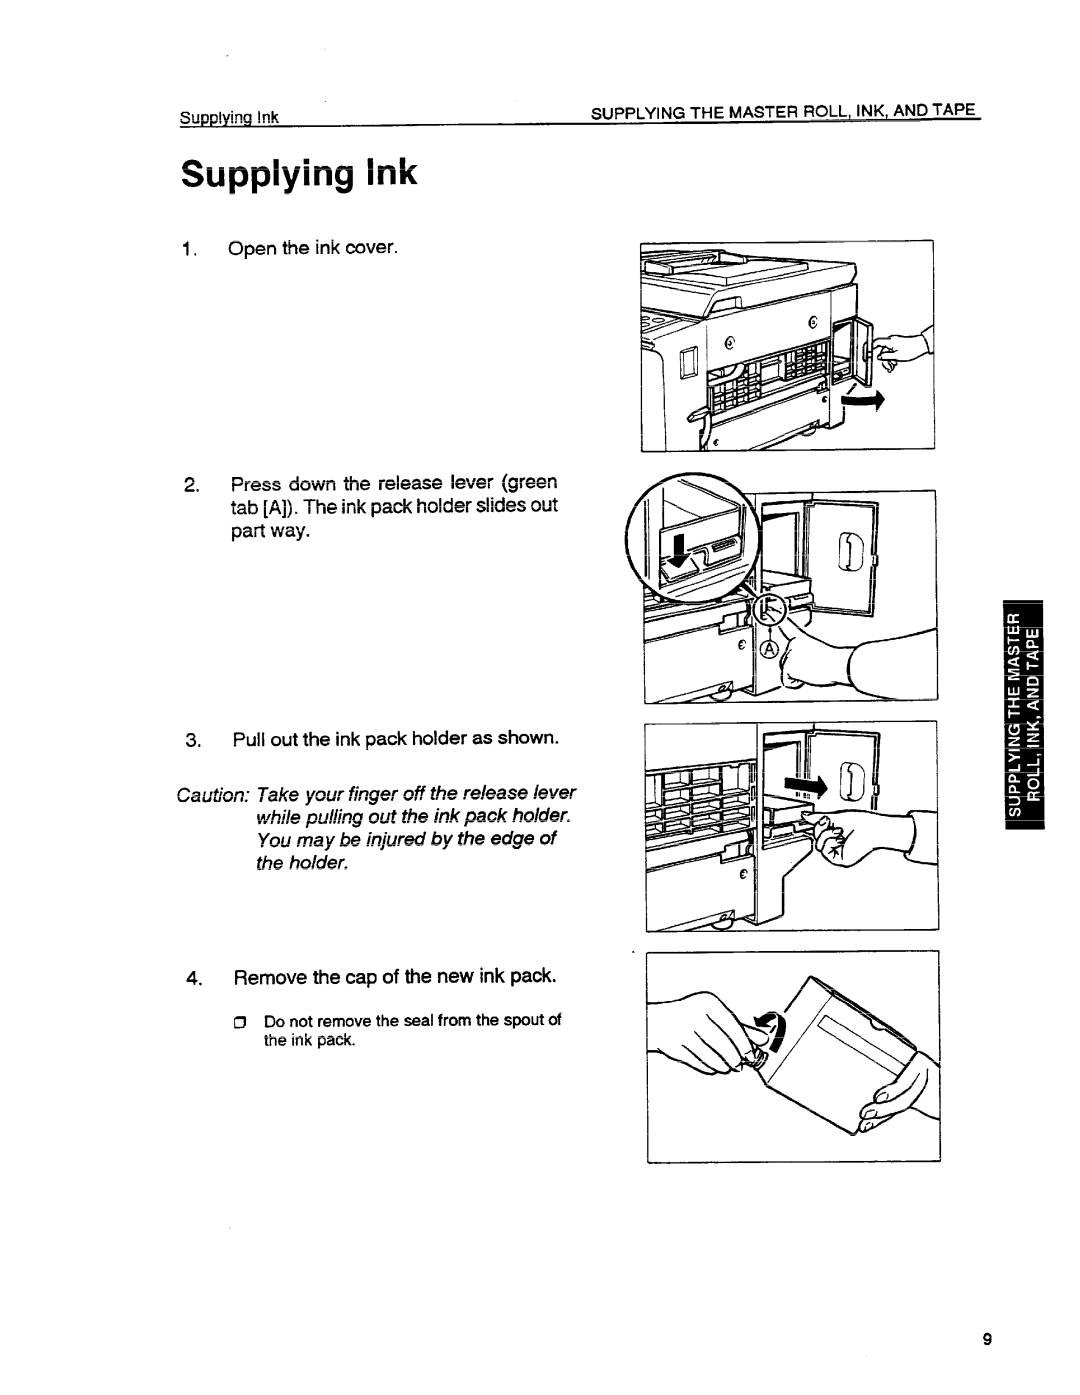 Ricoh VT1730 manual Supplying Ink, O Do not remove the seal from the spout of the ink pack 